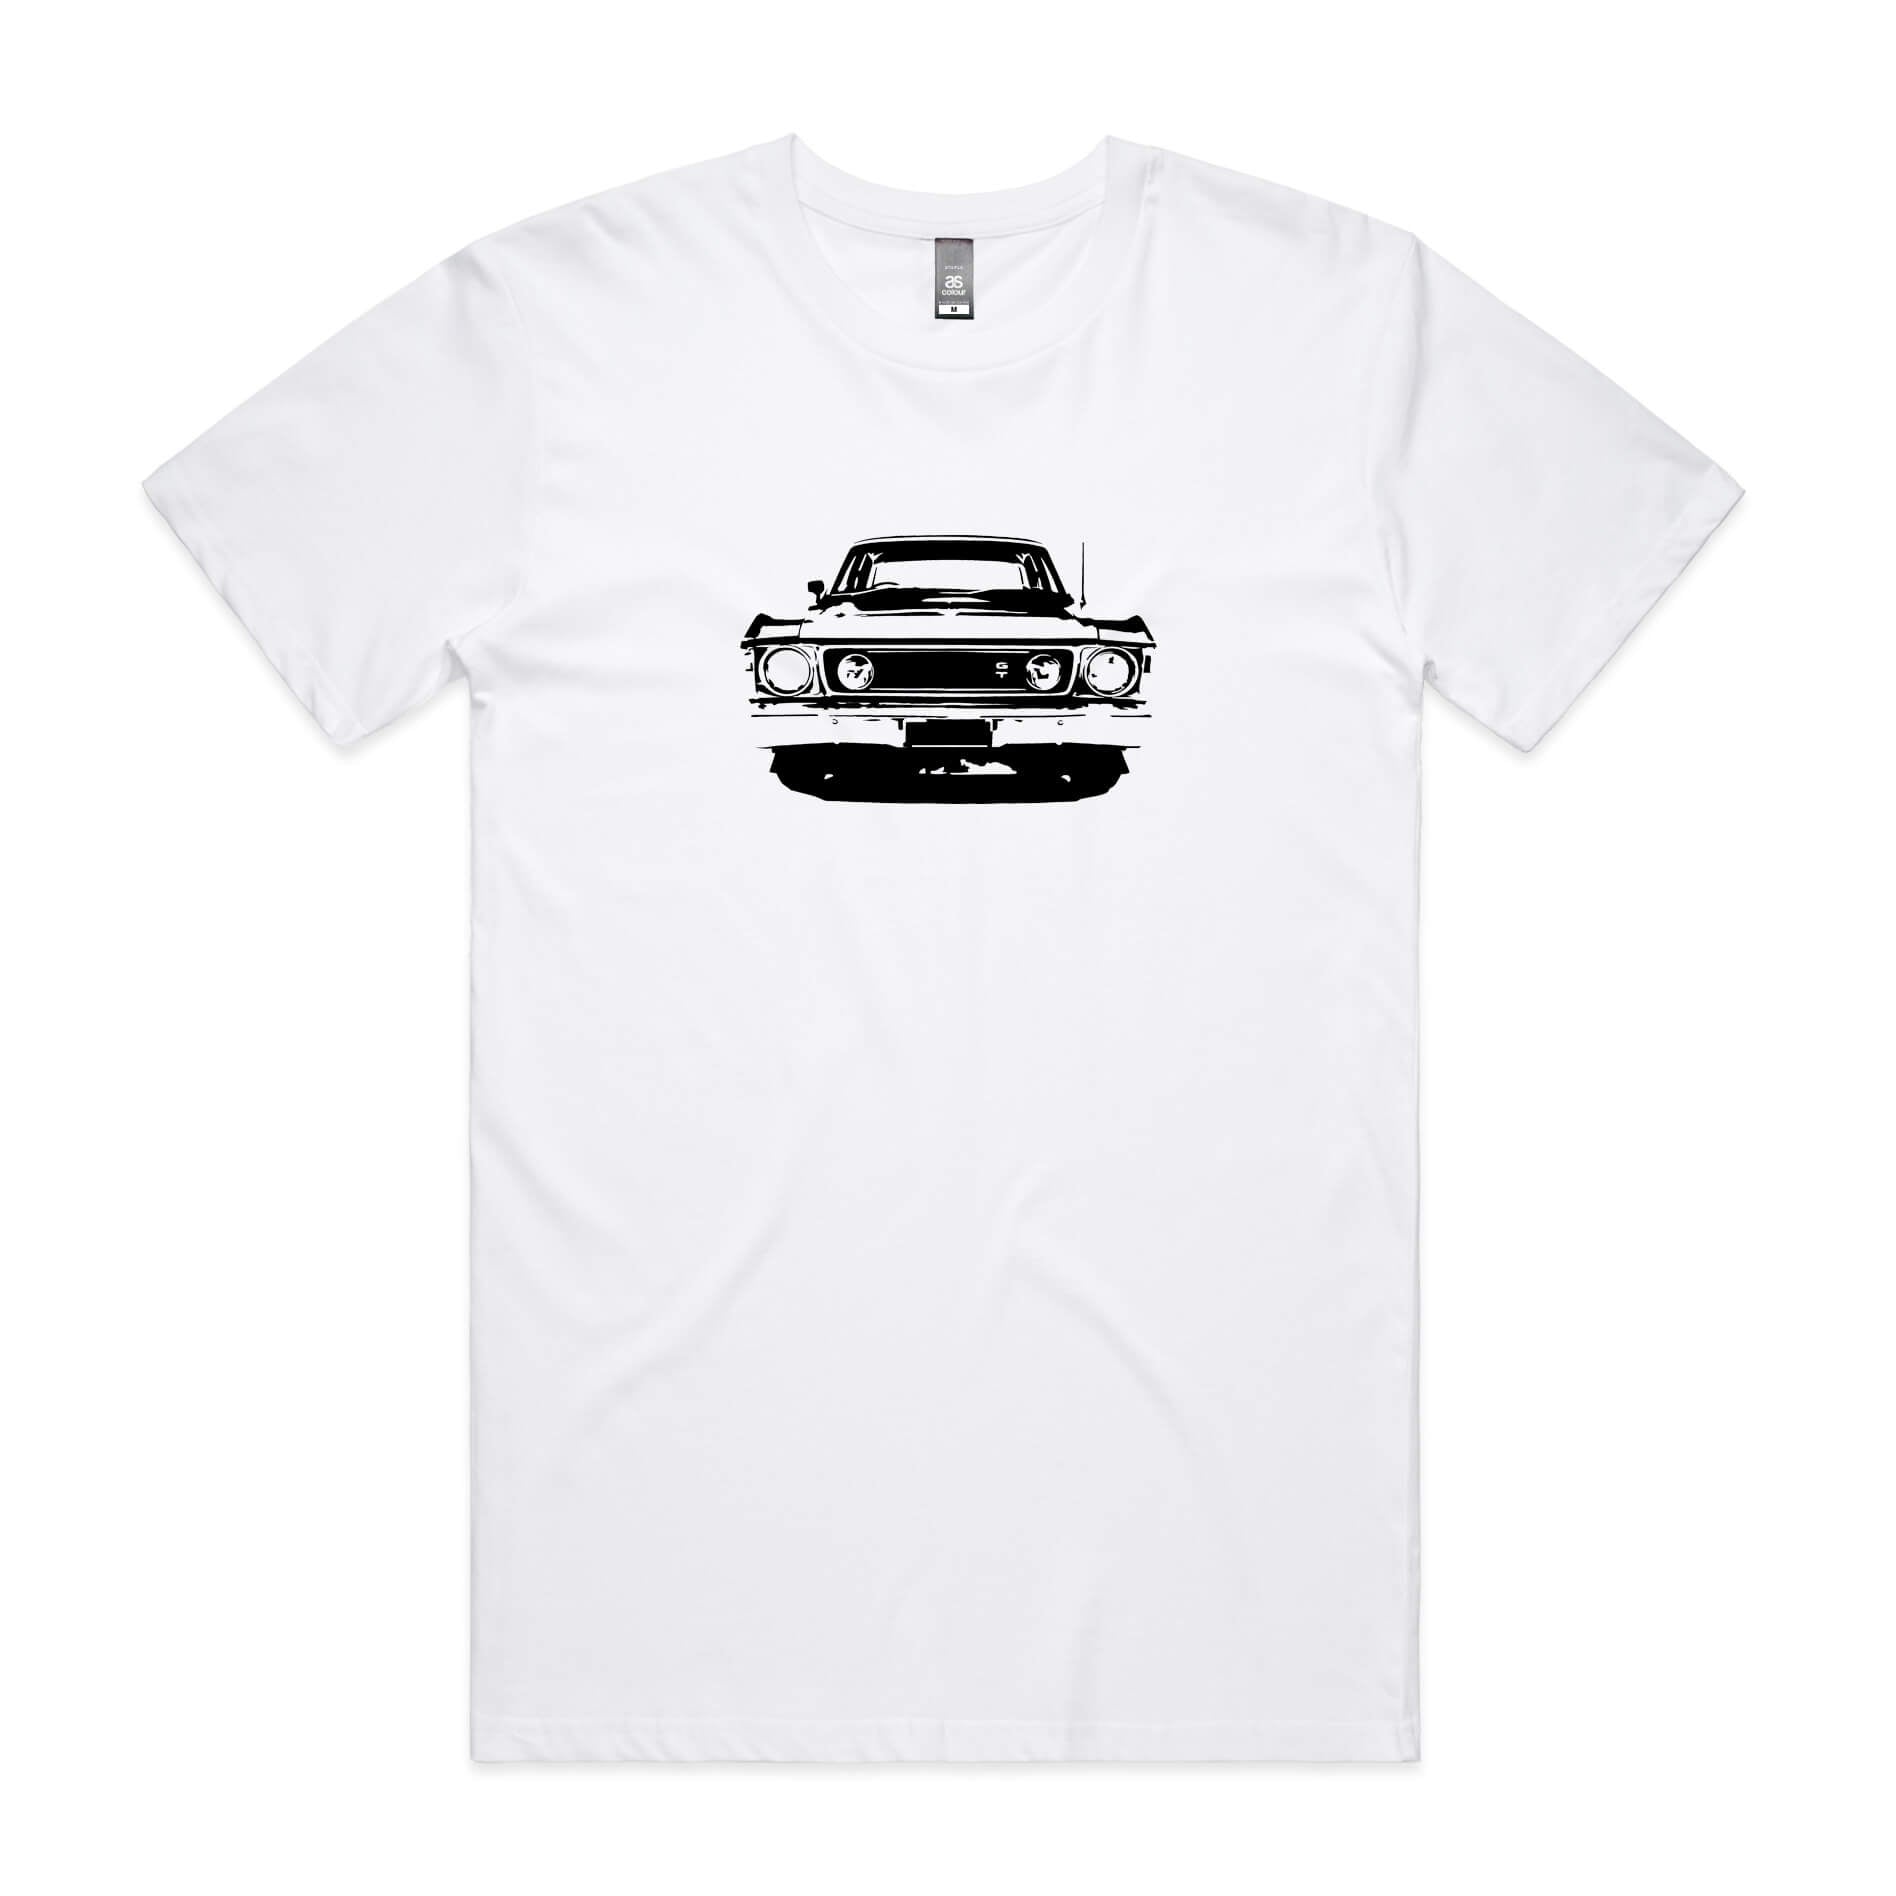 Ford XW Falcon t-shirt in white with black GT car graphic